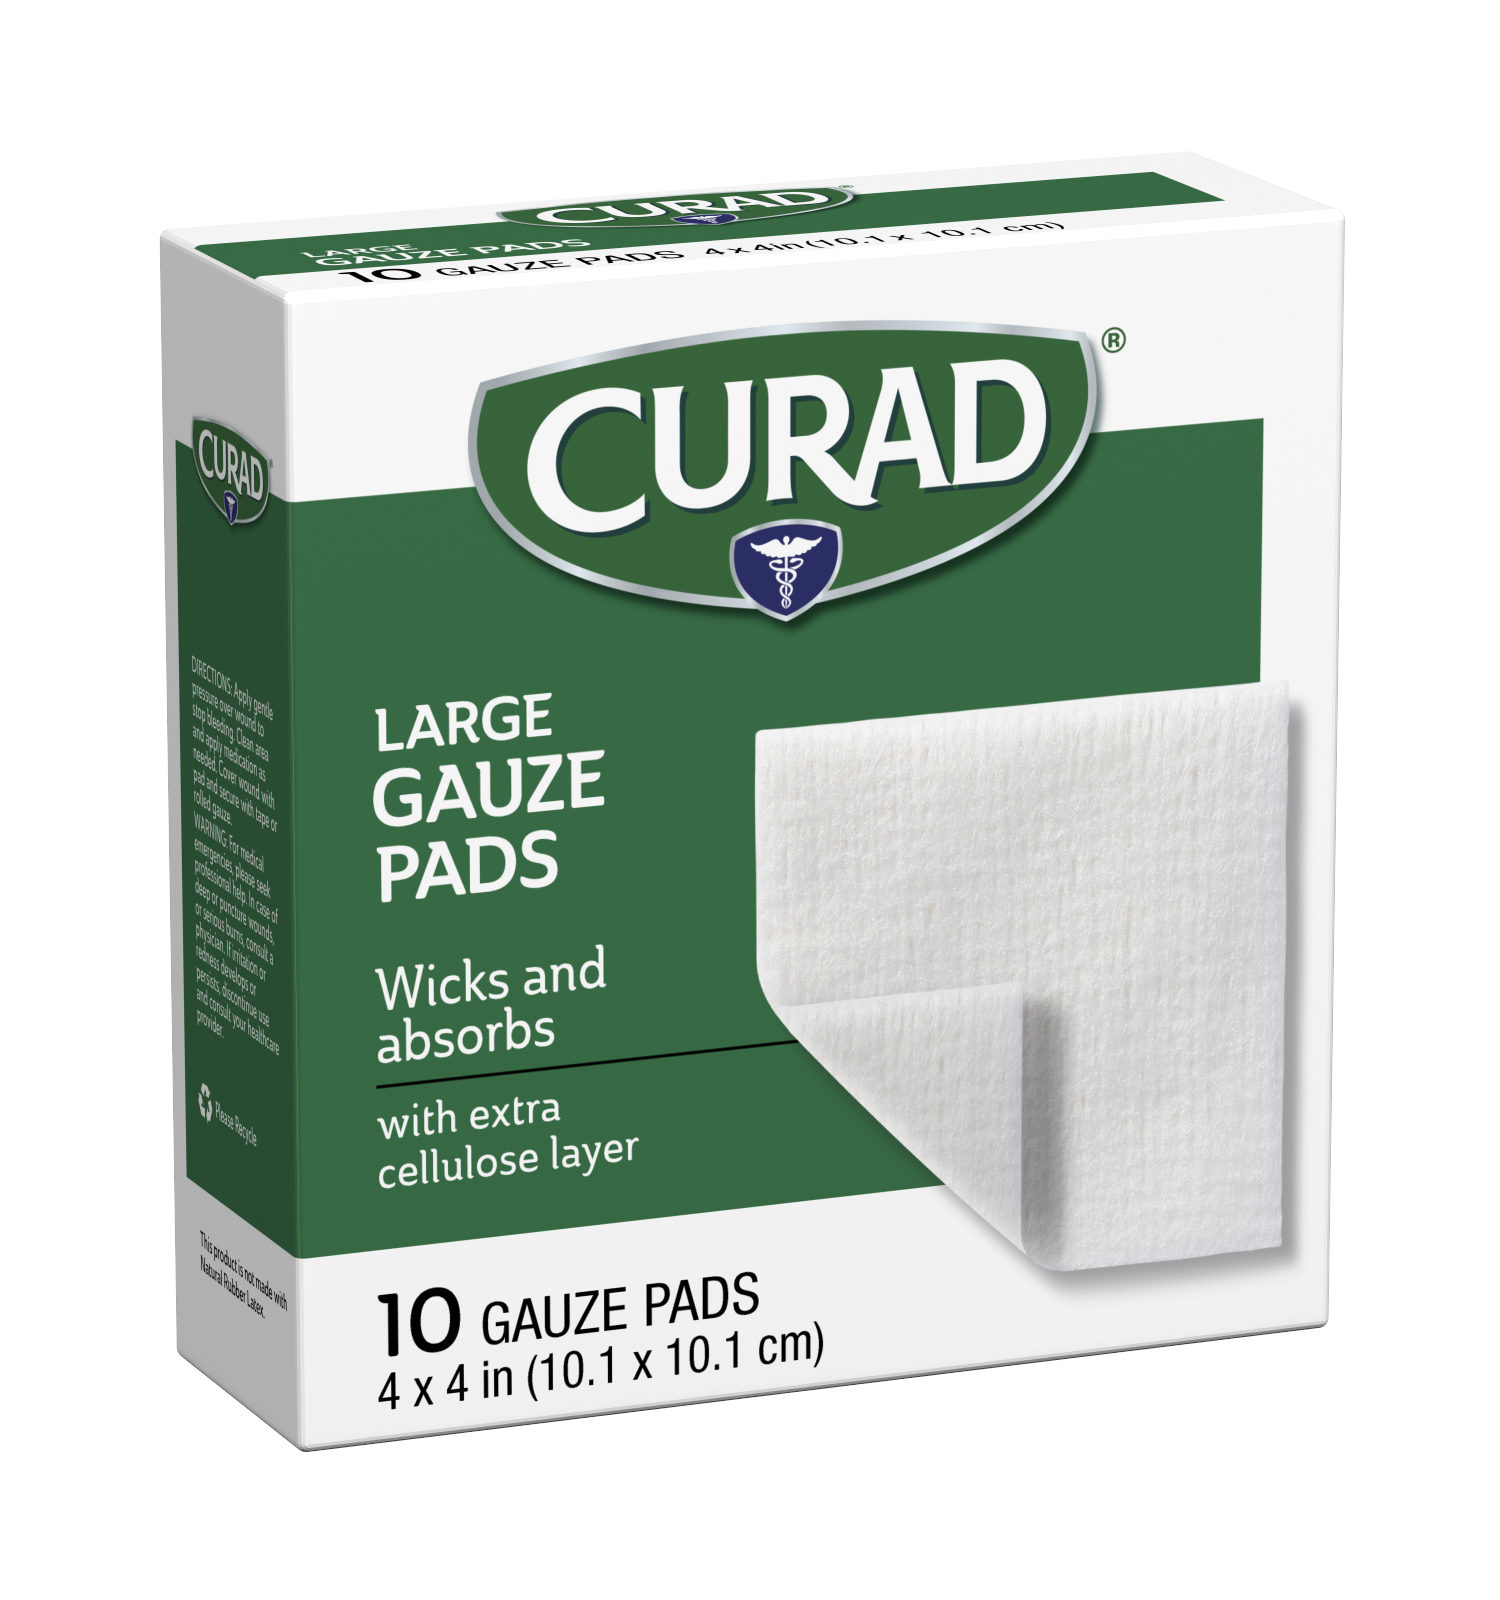 Rite Aid First Aid Gauze Pads, Variety Pack - Includes 25 Assorted Gauze  Pads & Tape | Sterile Gauze Pads | First Aid Kit | Wound Care Supplies